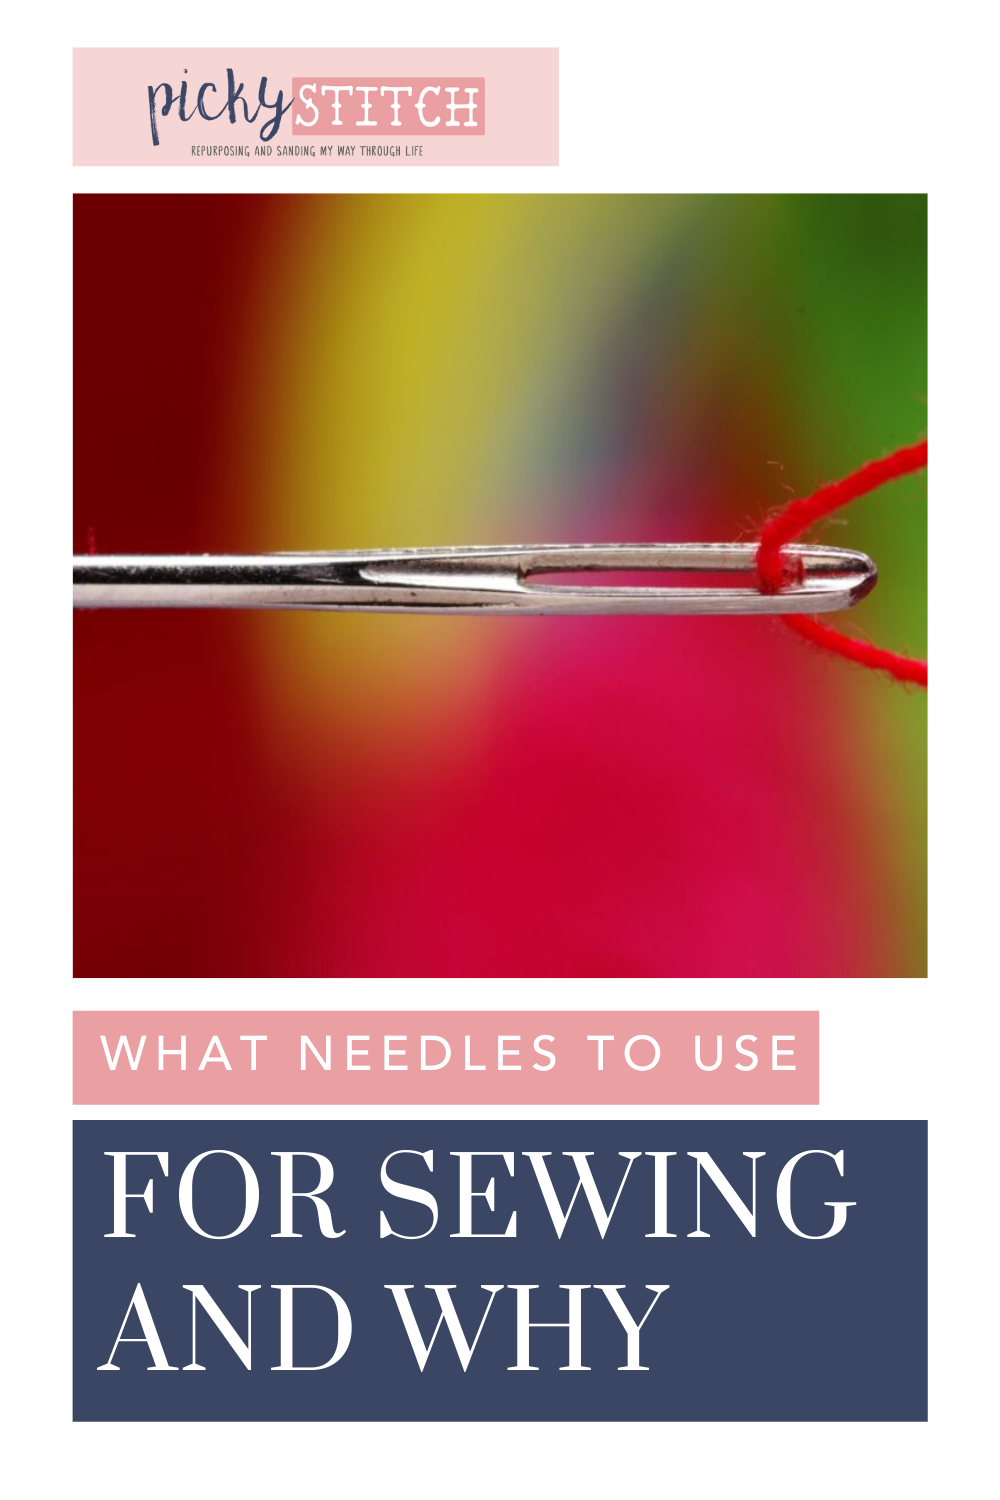 Pickystitch.com is the mecca of crafts! Find project ideas, tips, and more! Get started by learning the different types of needles to use for your sewing projects!